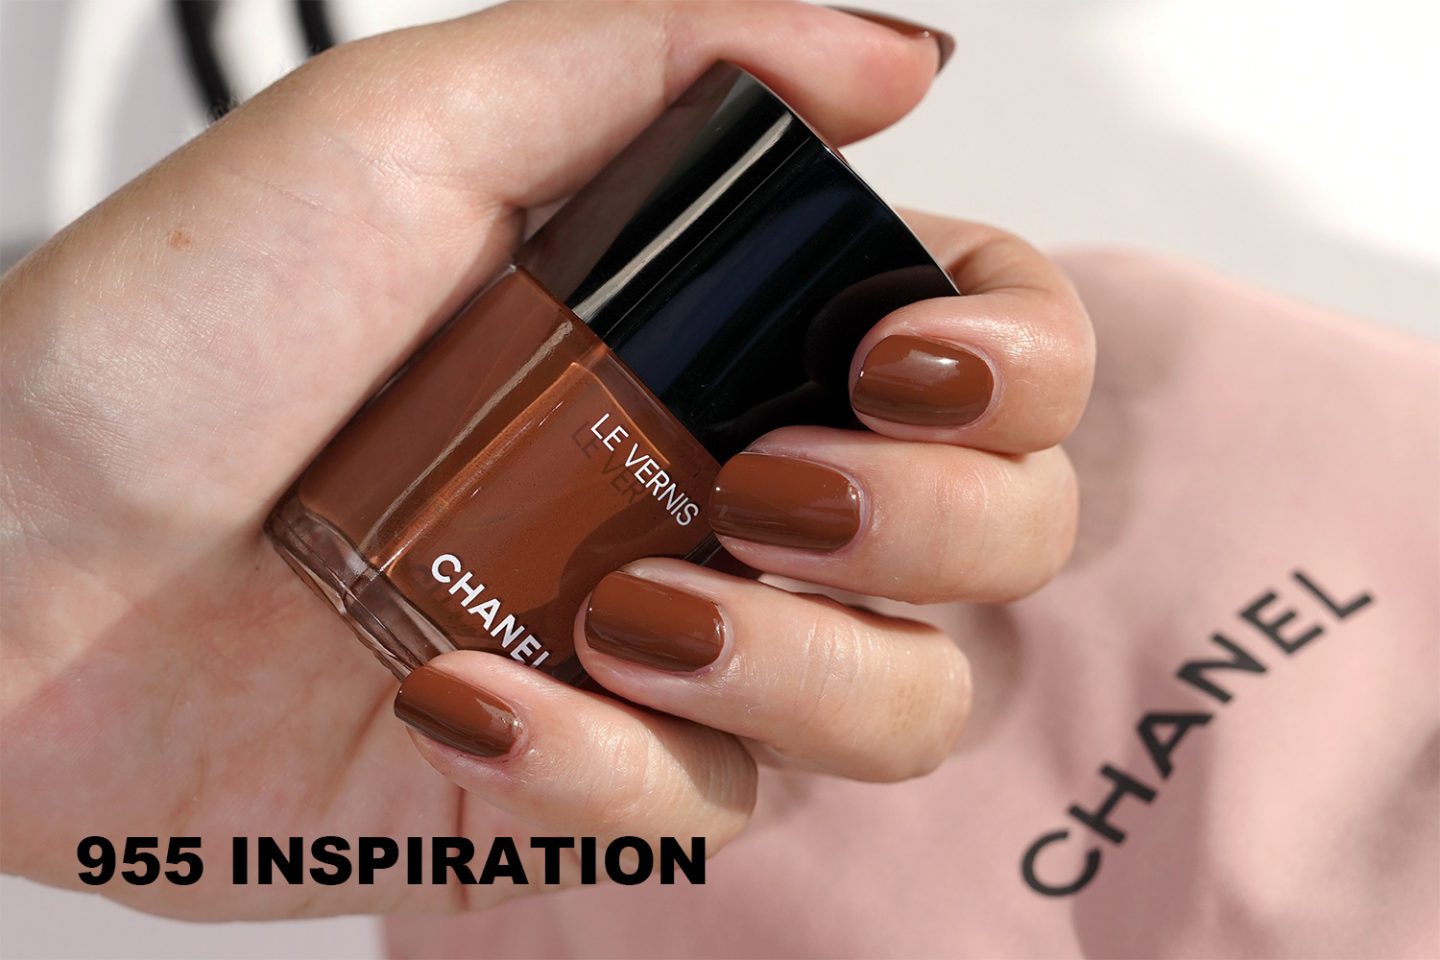 Chanel Le Vernis 955 Inspiration swatch